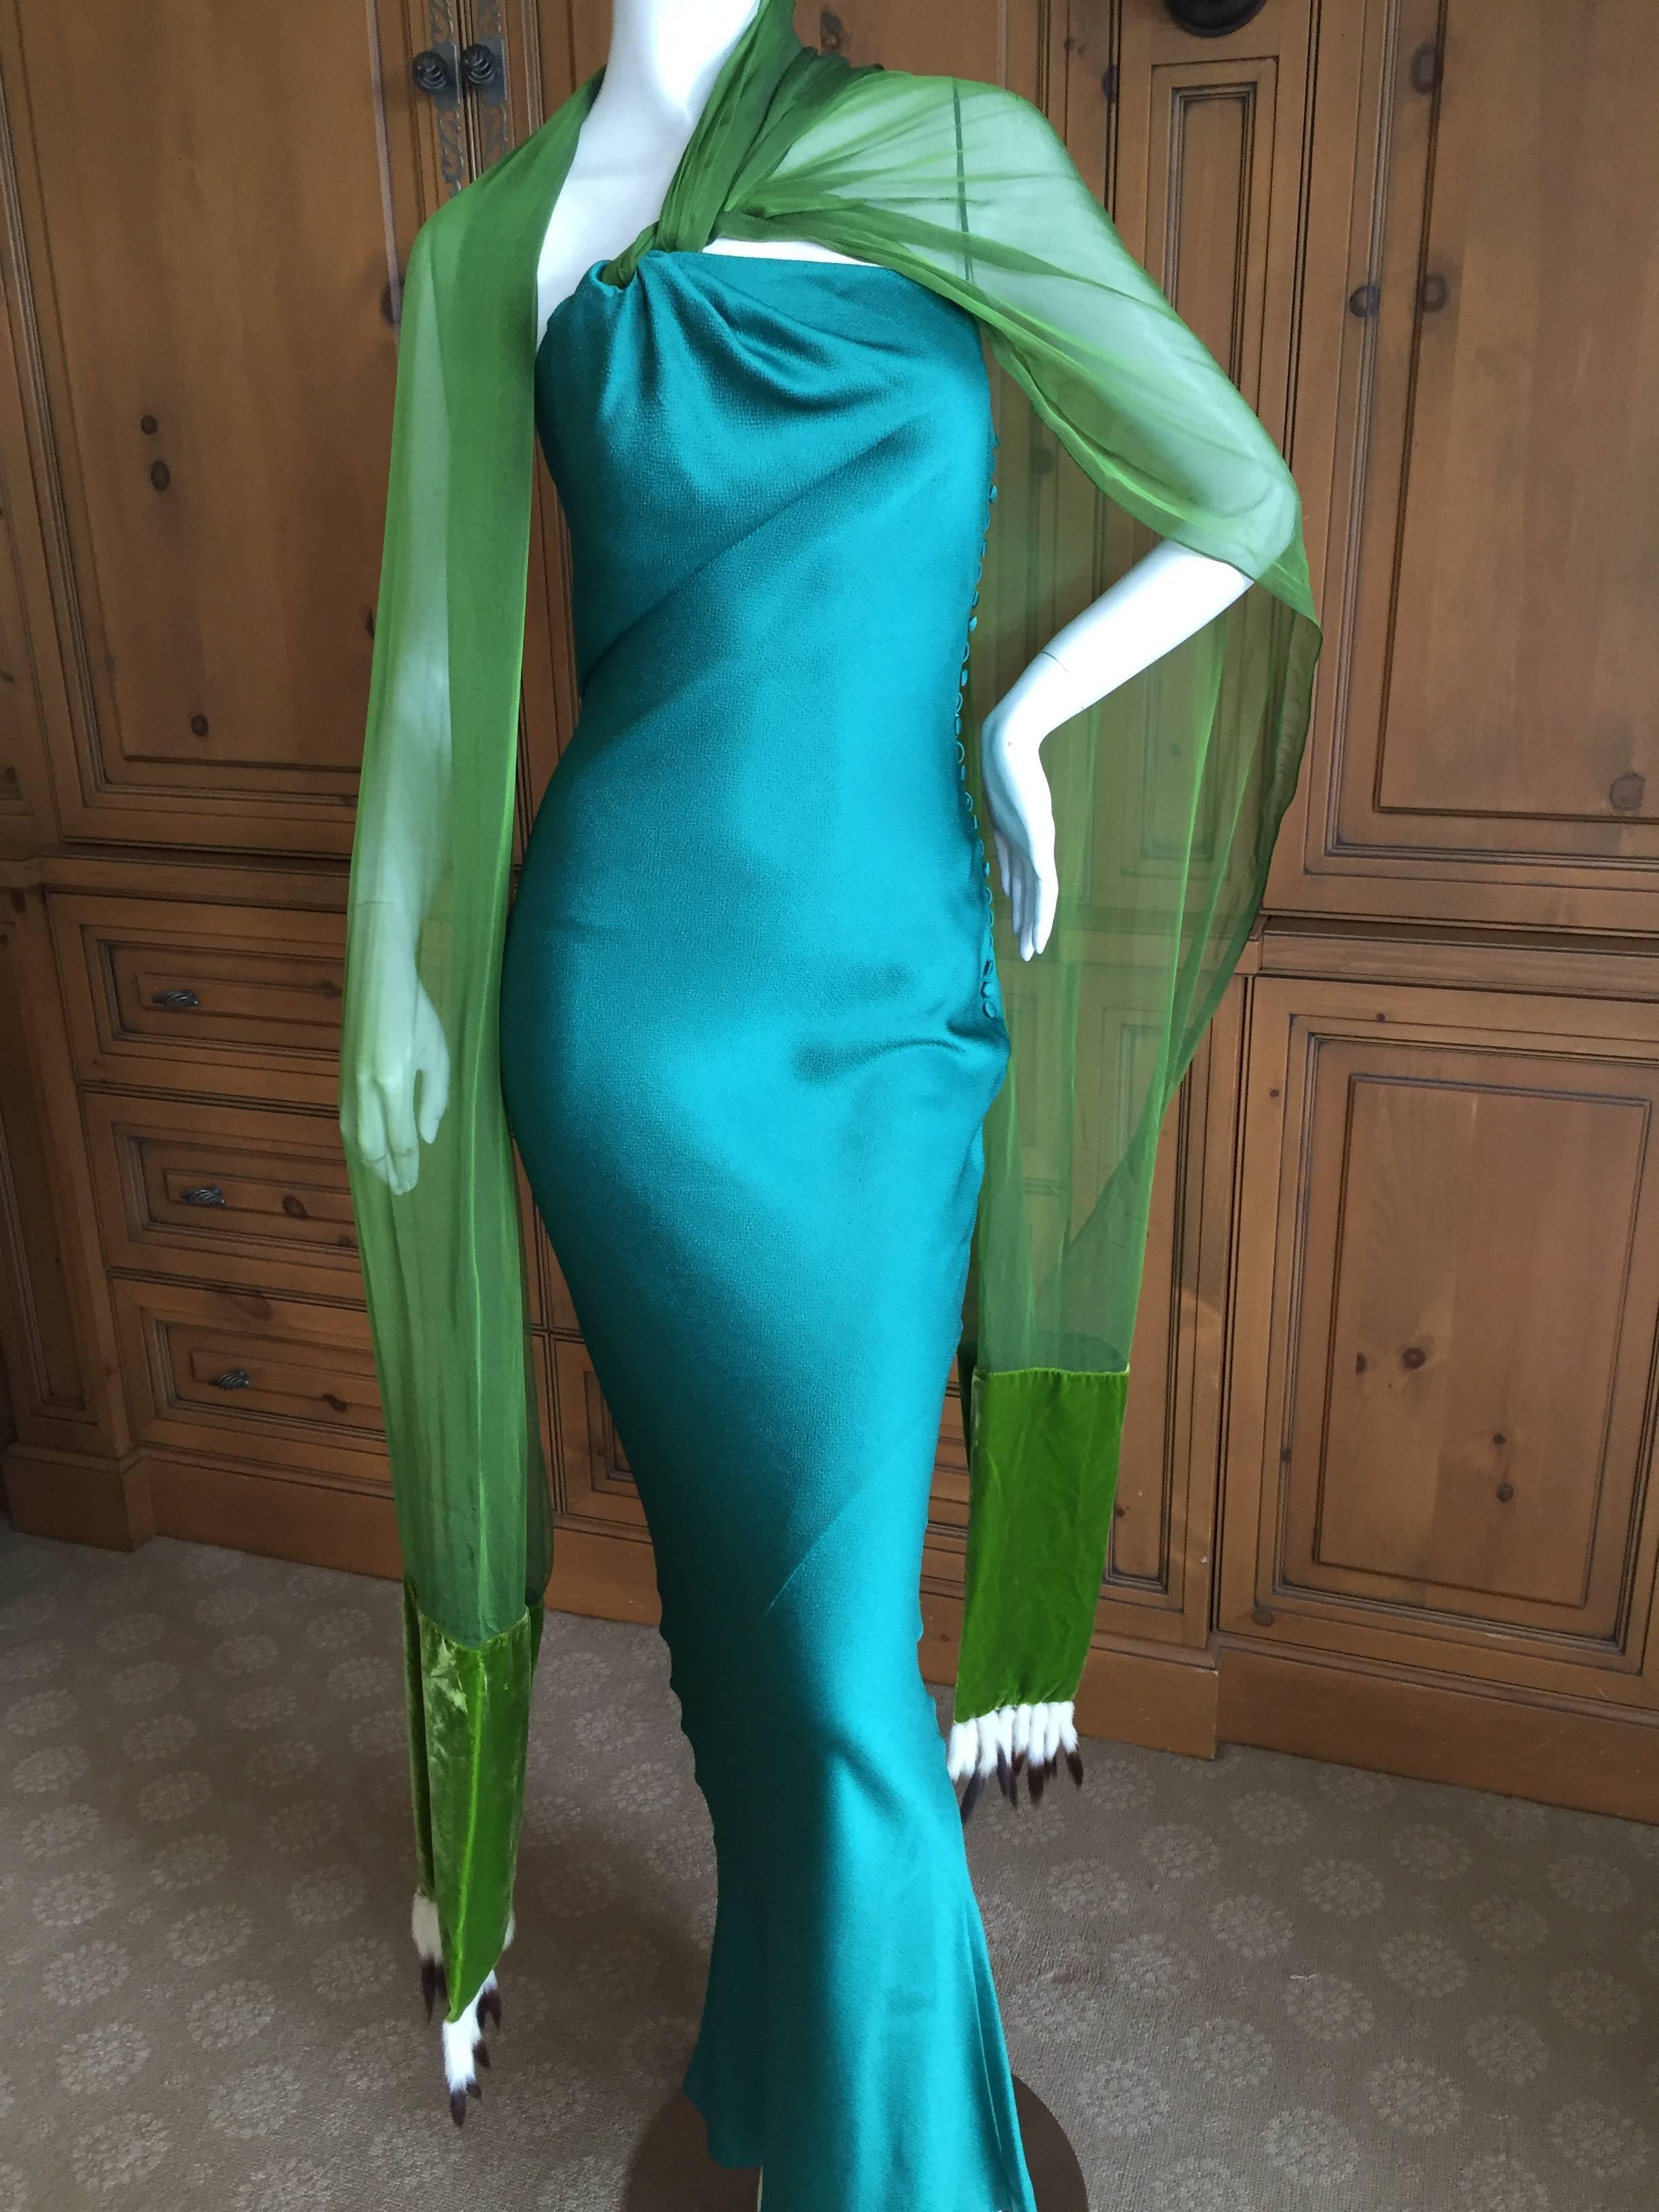 Beautiful textured silk bias cut dress from John Galliano for Christian Dior circa 1998.
Attached at the shoulder are two wide chiffon scarves trimmed at the ends with ermine tails.
I'm not certain how Galliano originally styled this, so I tried